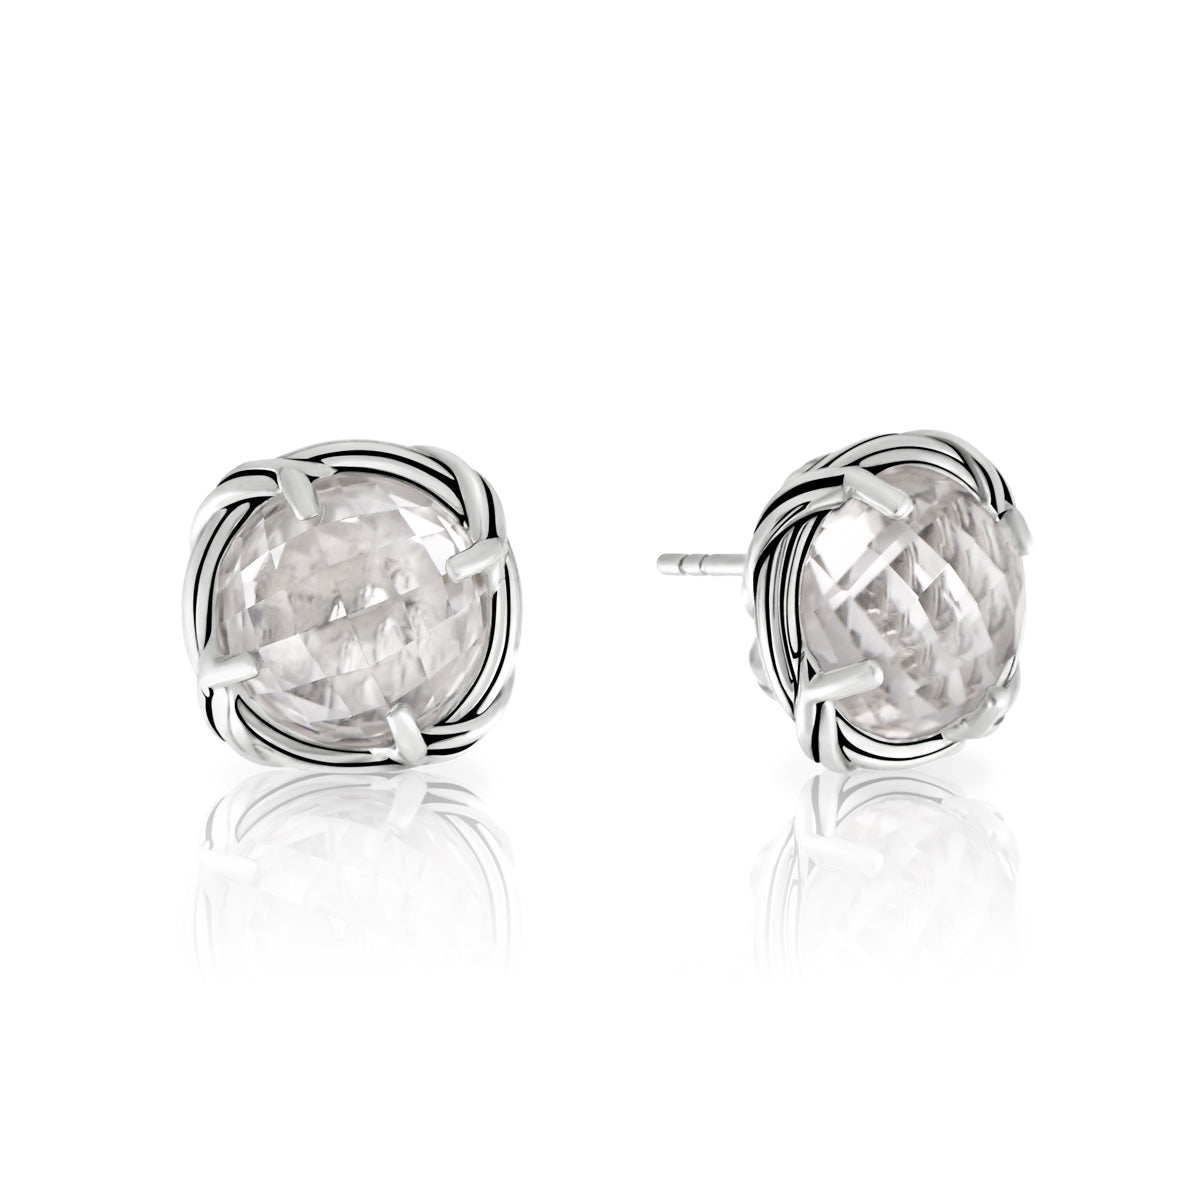 Peter Thomas Roth Ribbon & Reed Signature Classic Criss Cross Earrings in Sterling Silver with White Topaz